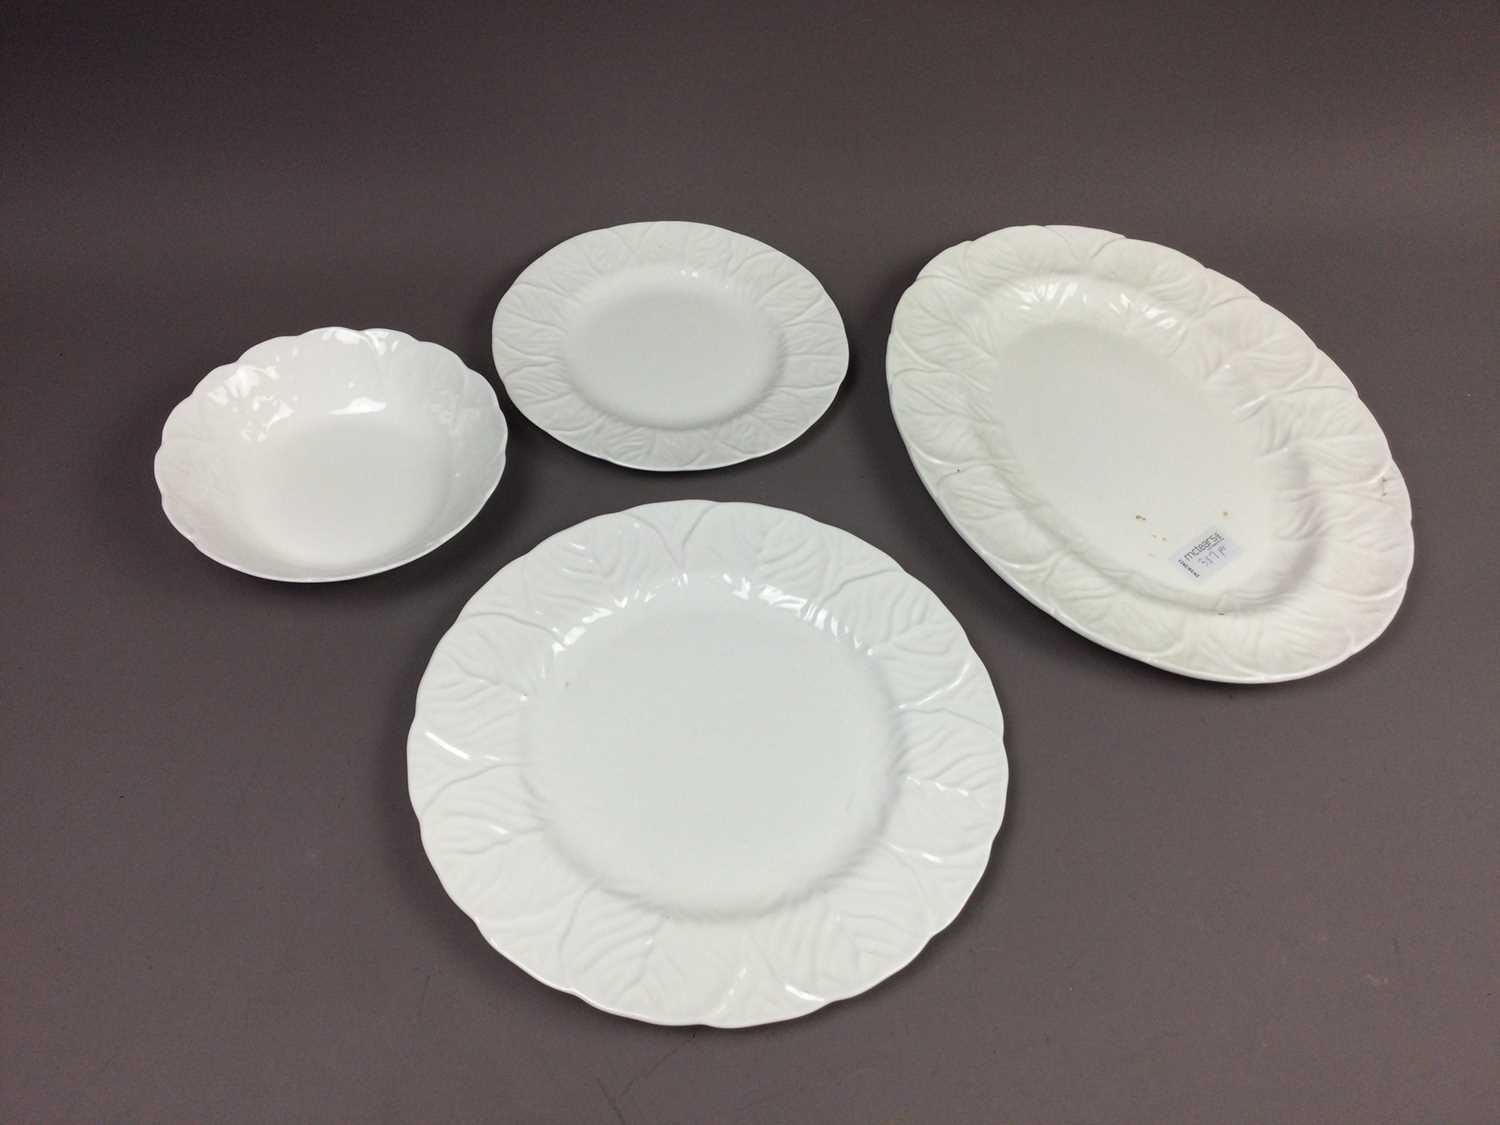 A WEDGWOOD 'COUNTRYWARE' PART DINNER SERVICE